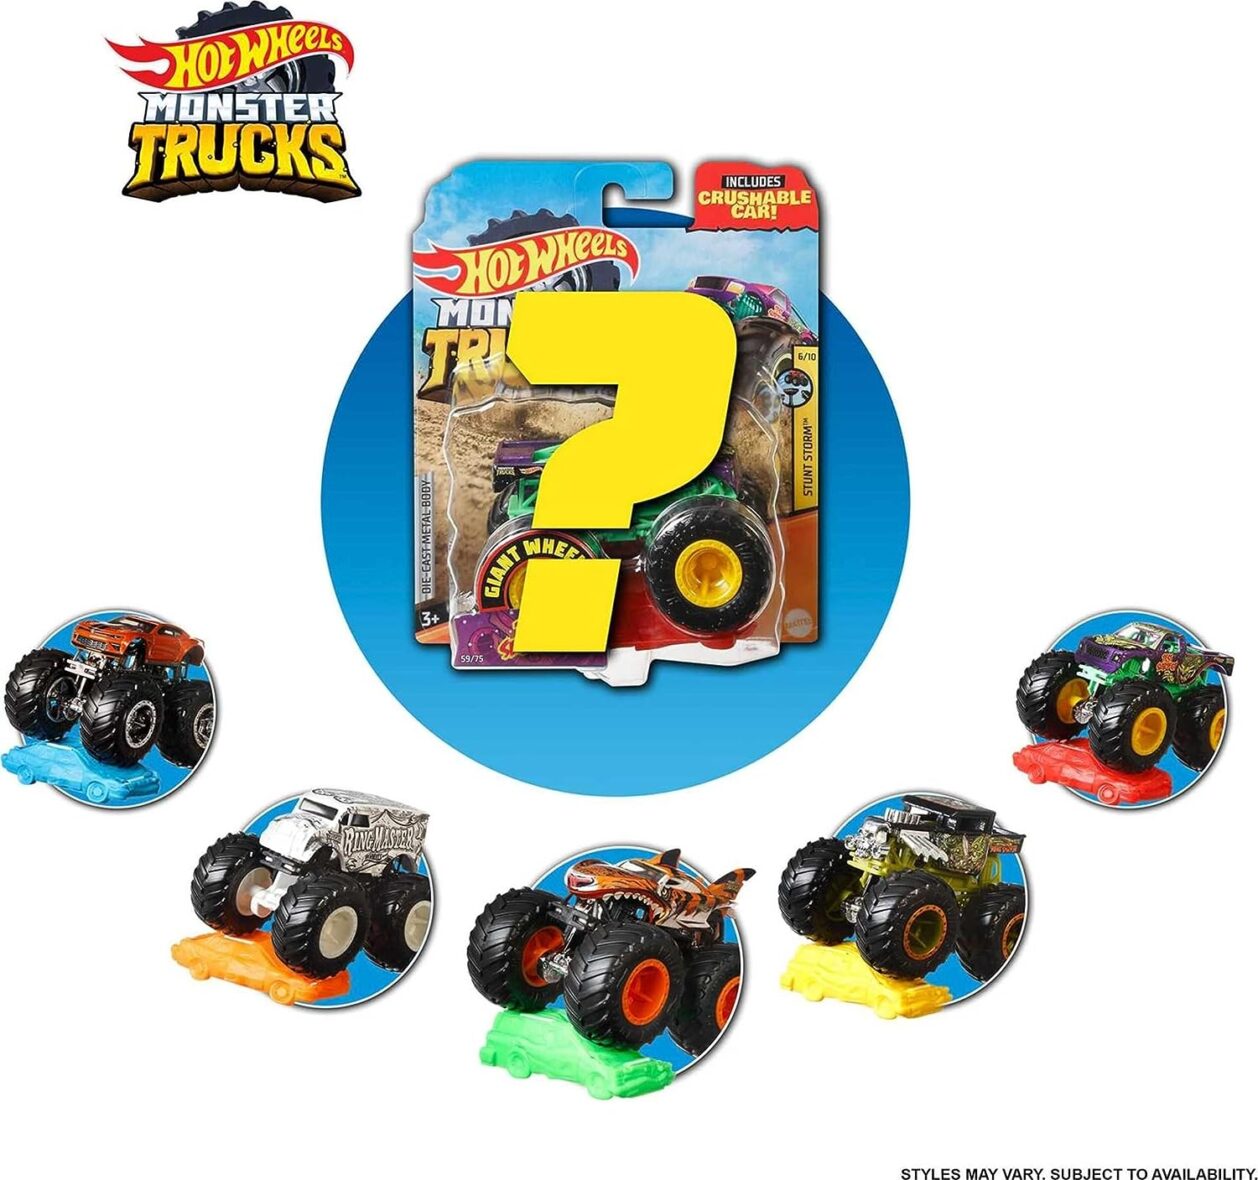 Hot Wheels Monster Trucks, 1 pack Toy Truck in 1:64 Scale & 1 Crushable Car (Styles May Vary)